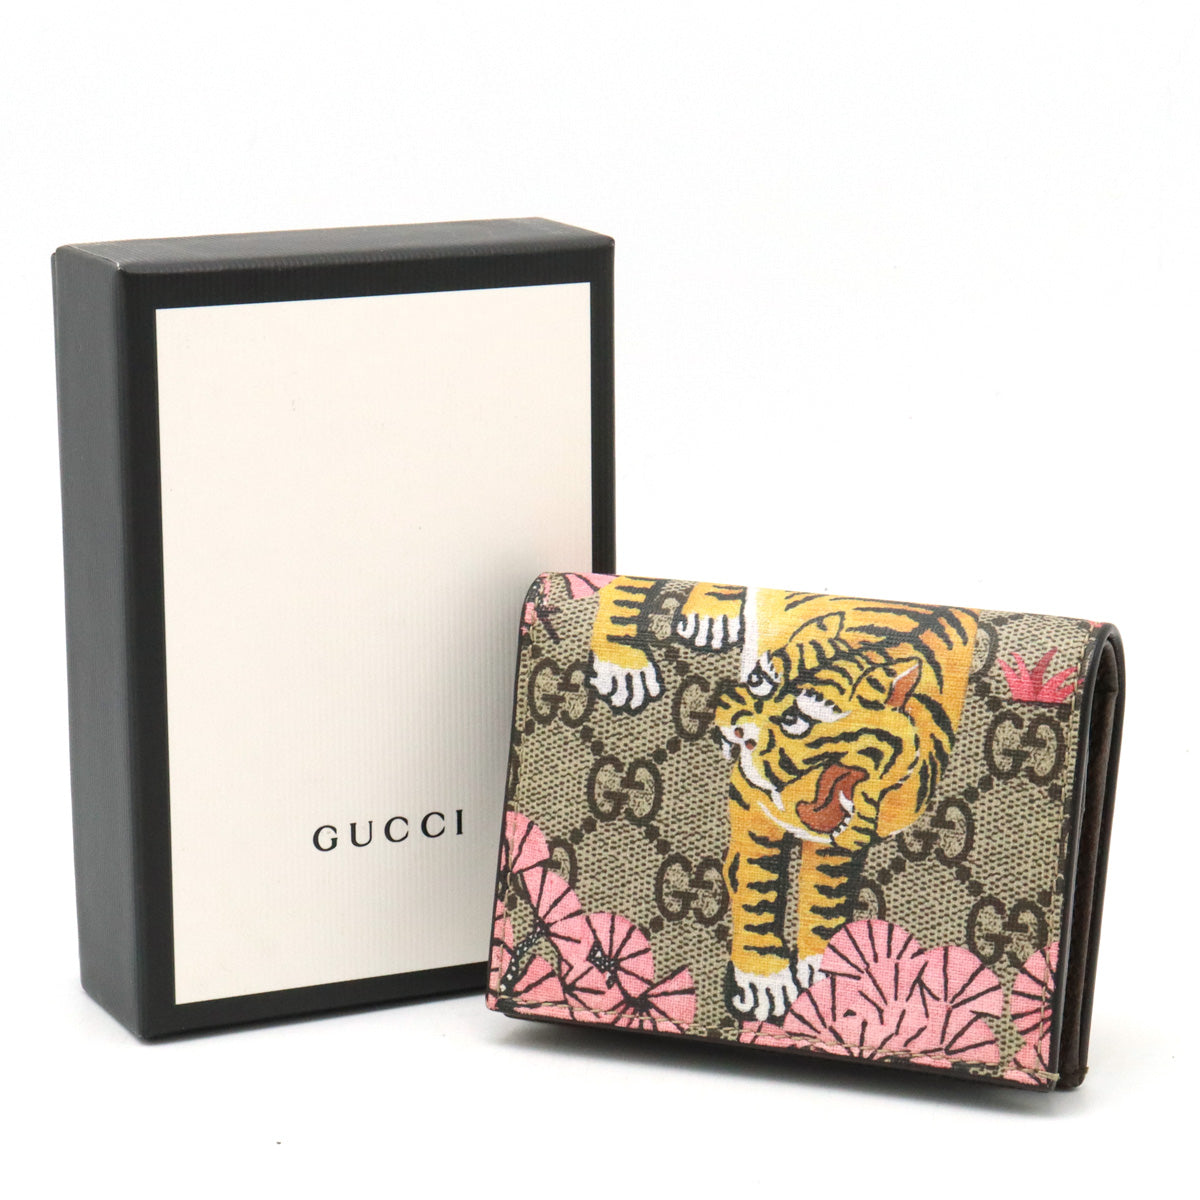 GUCCI Gucci GG Spring Compact Wallet Two-fold Wallet Bengal Tiger Tiger Tiger PVC Leather Beige Yellow 452362 [Middle-Old] Blythe Blumen/Montana Quality